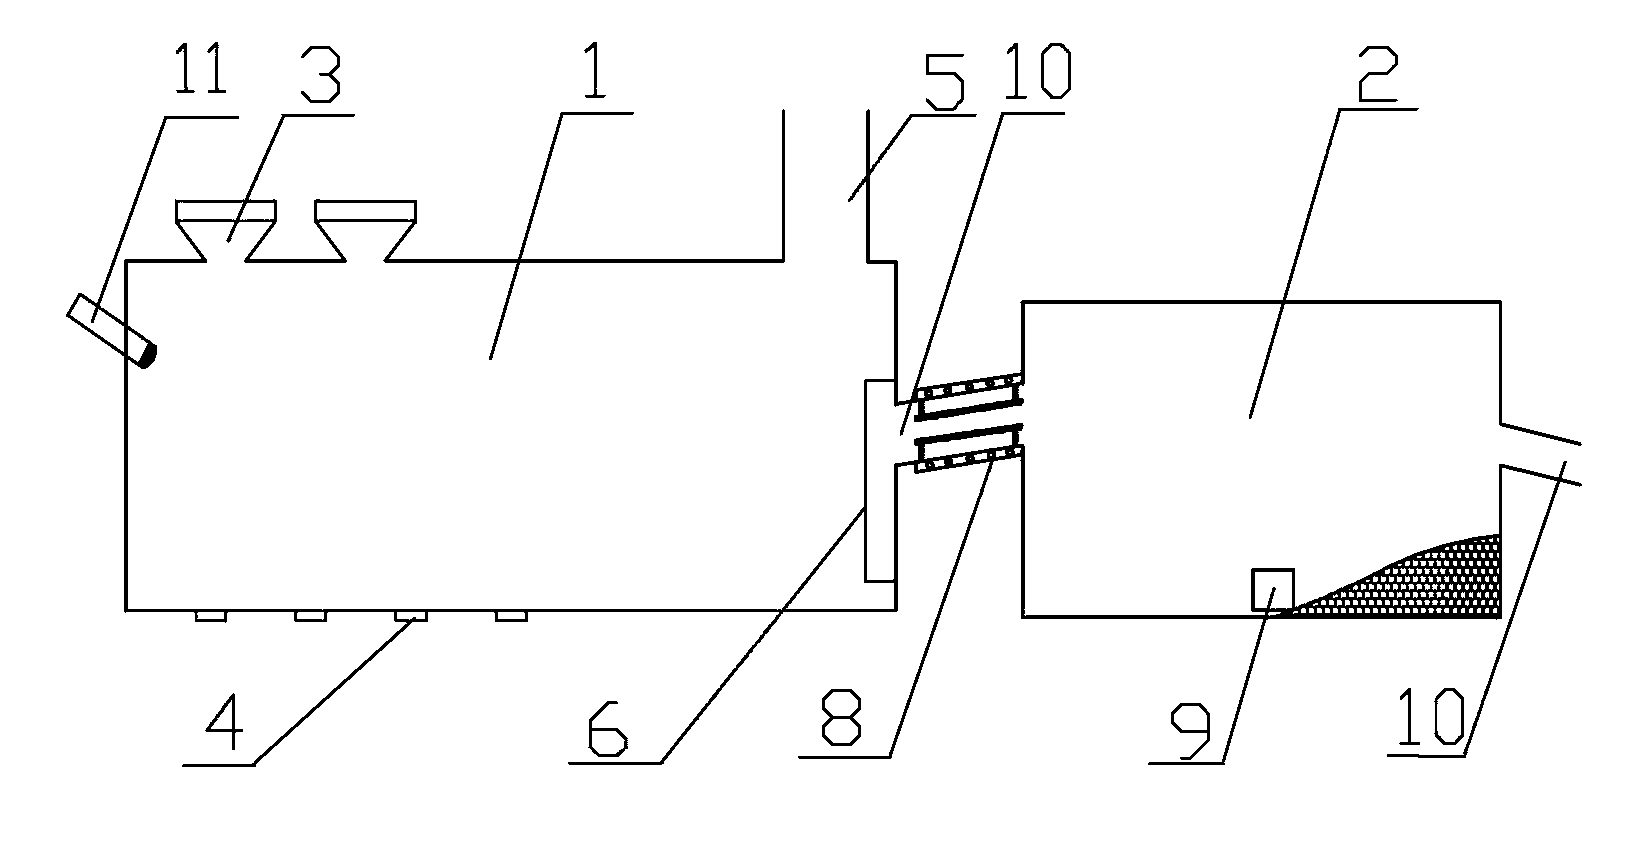 Horizontal type molten pool smelting process outside furnace and dedicated device thereof